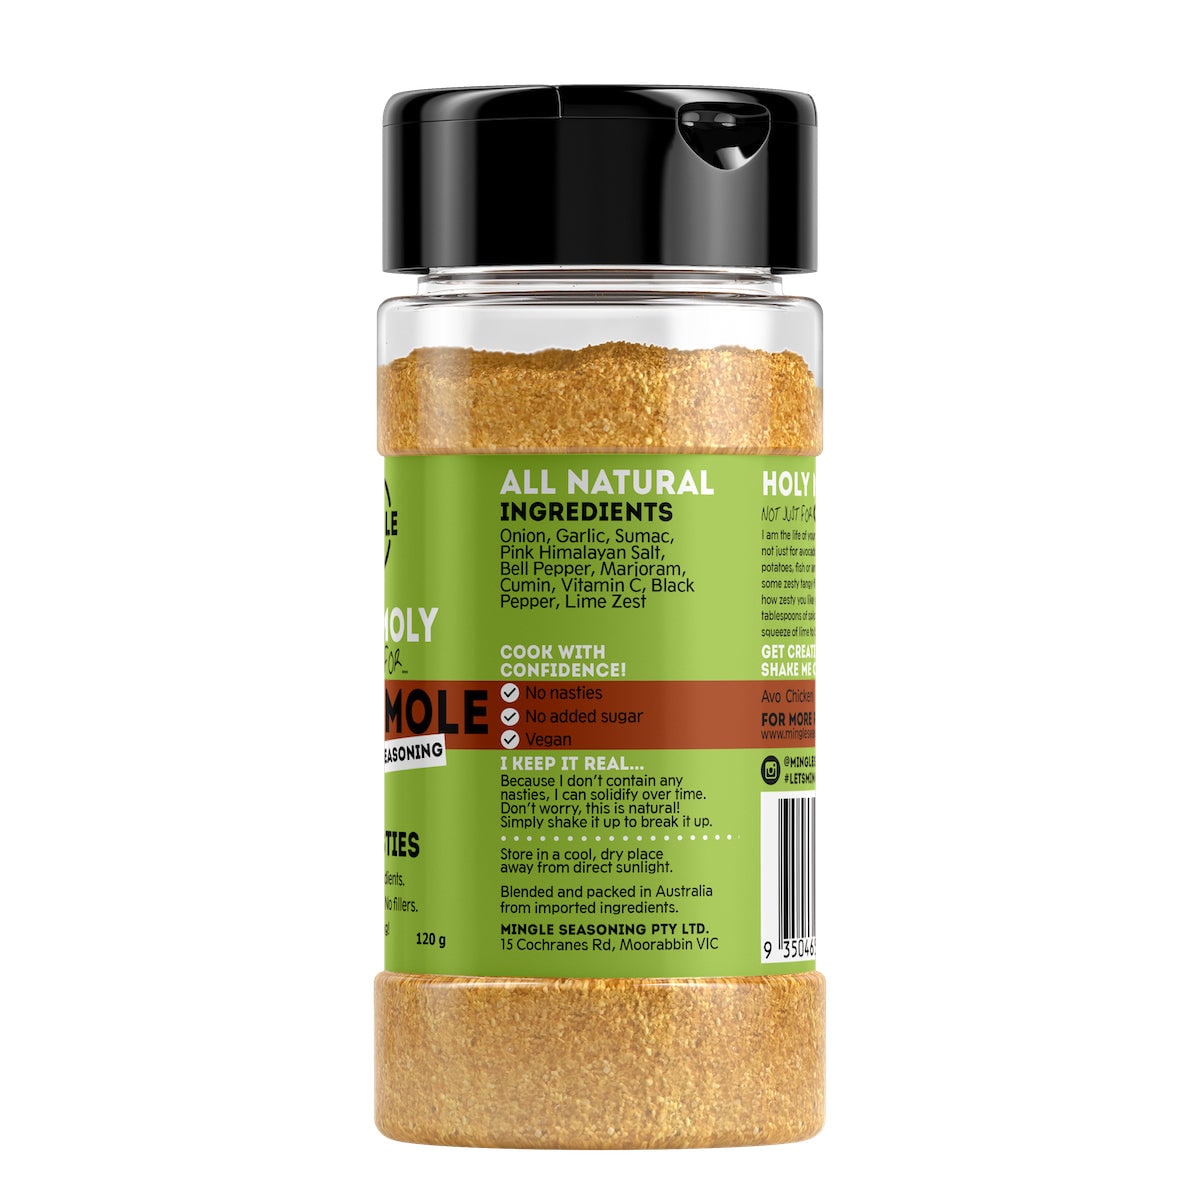 Mingle Seasoning Holy Moly Not Just For Guacamole 120g